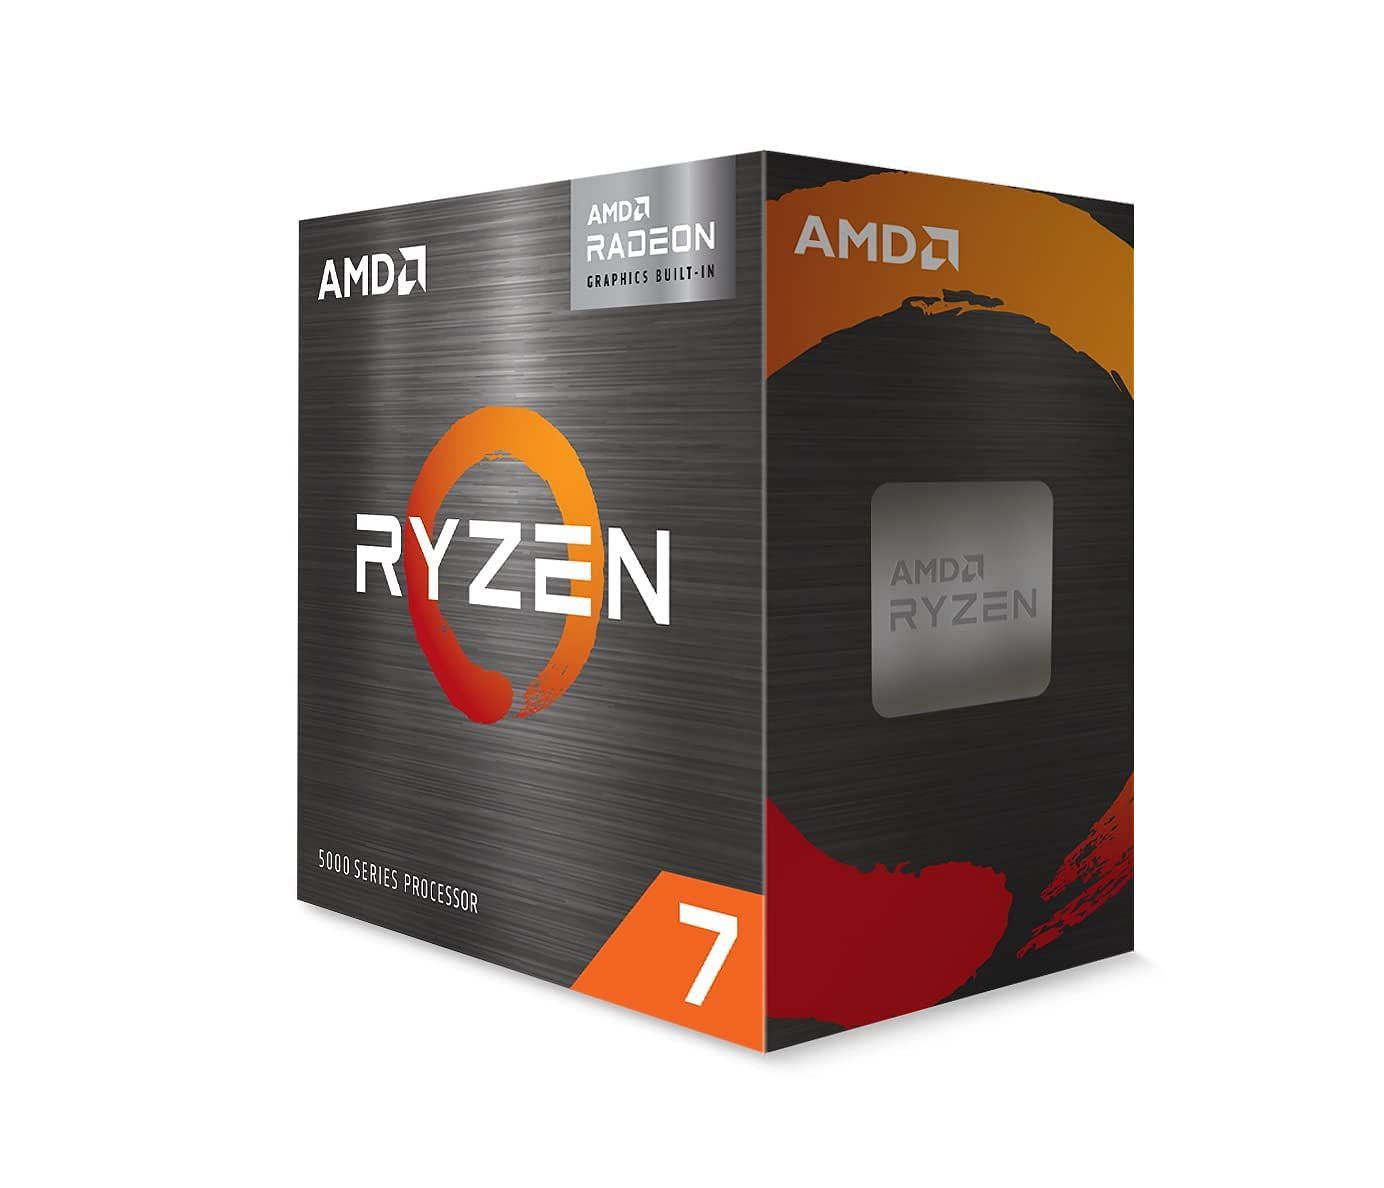 The Ryzen 7 5700G will be able to run the best games at a minimum of 720p and most games at 1080p (Image via Amazon)